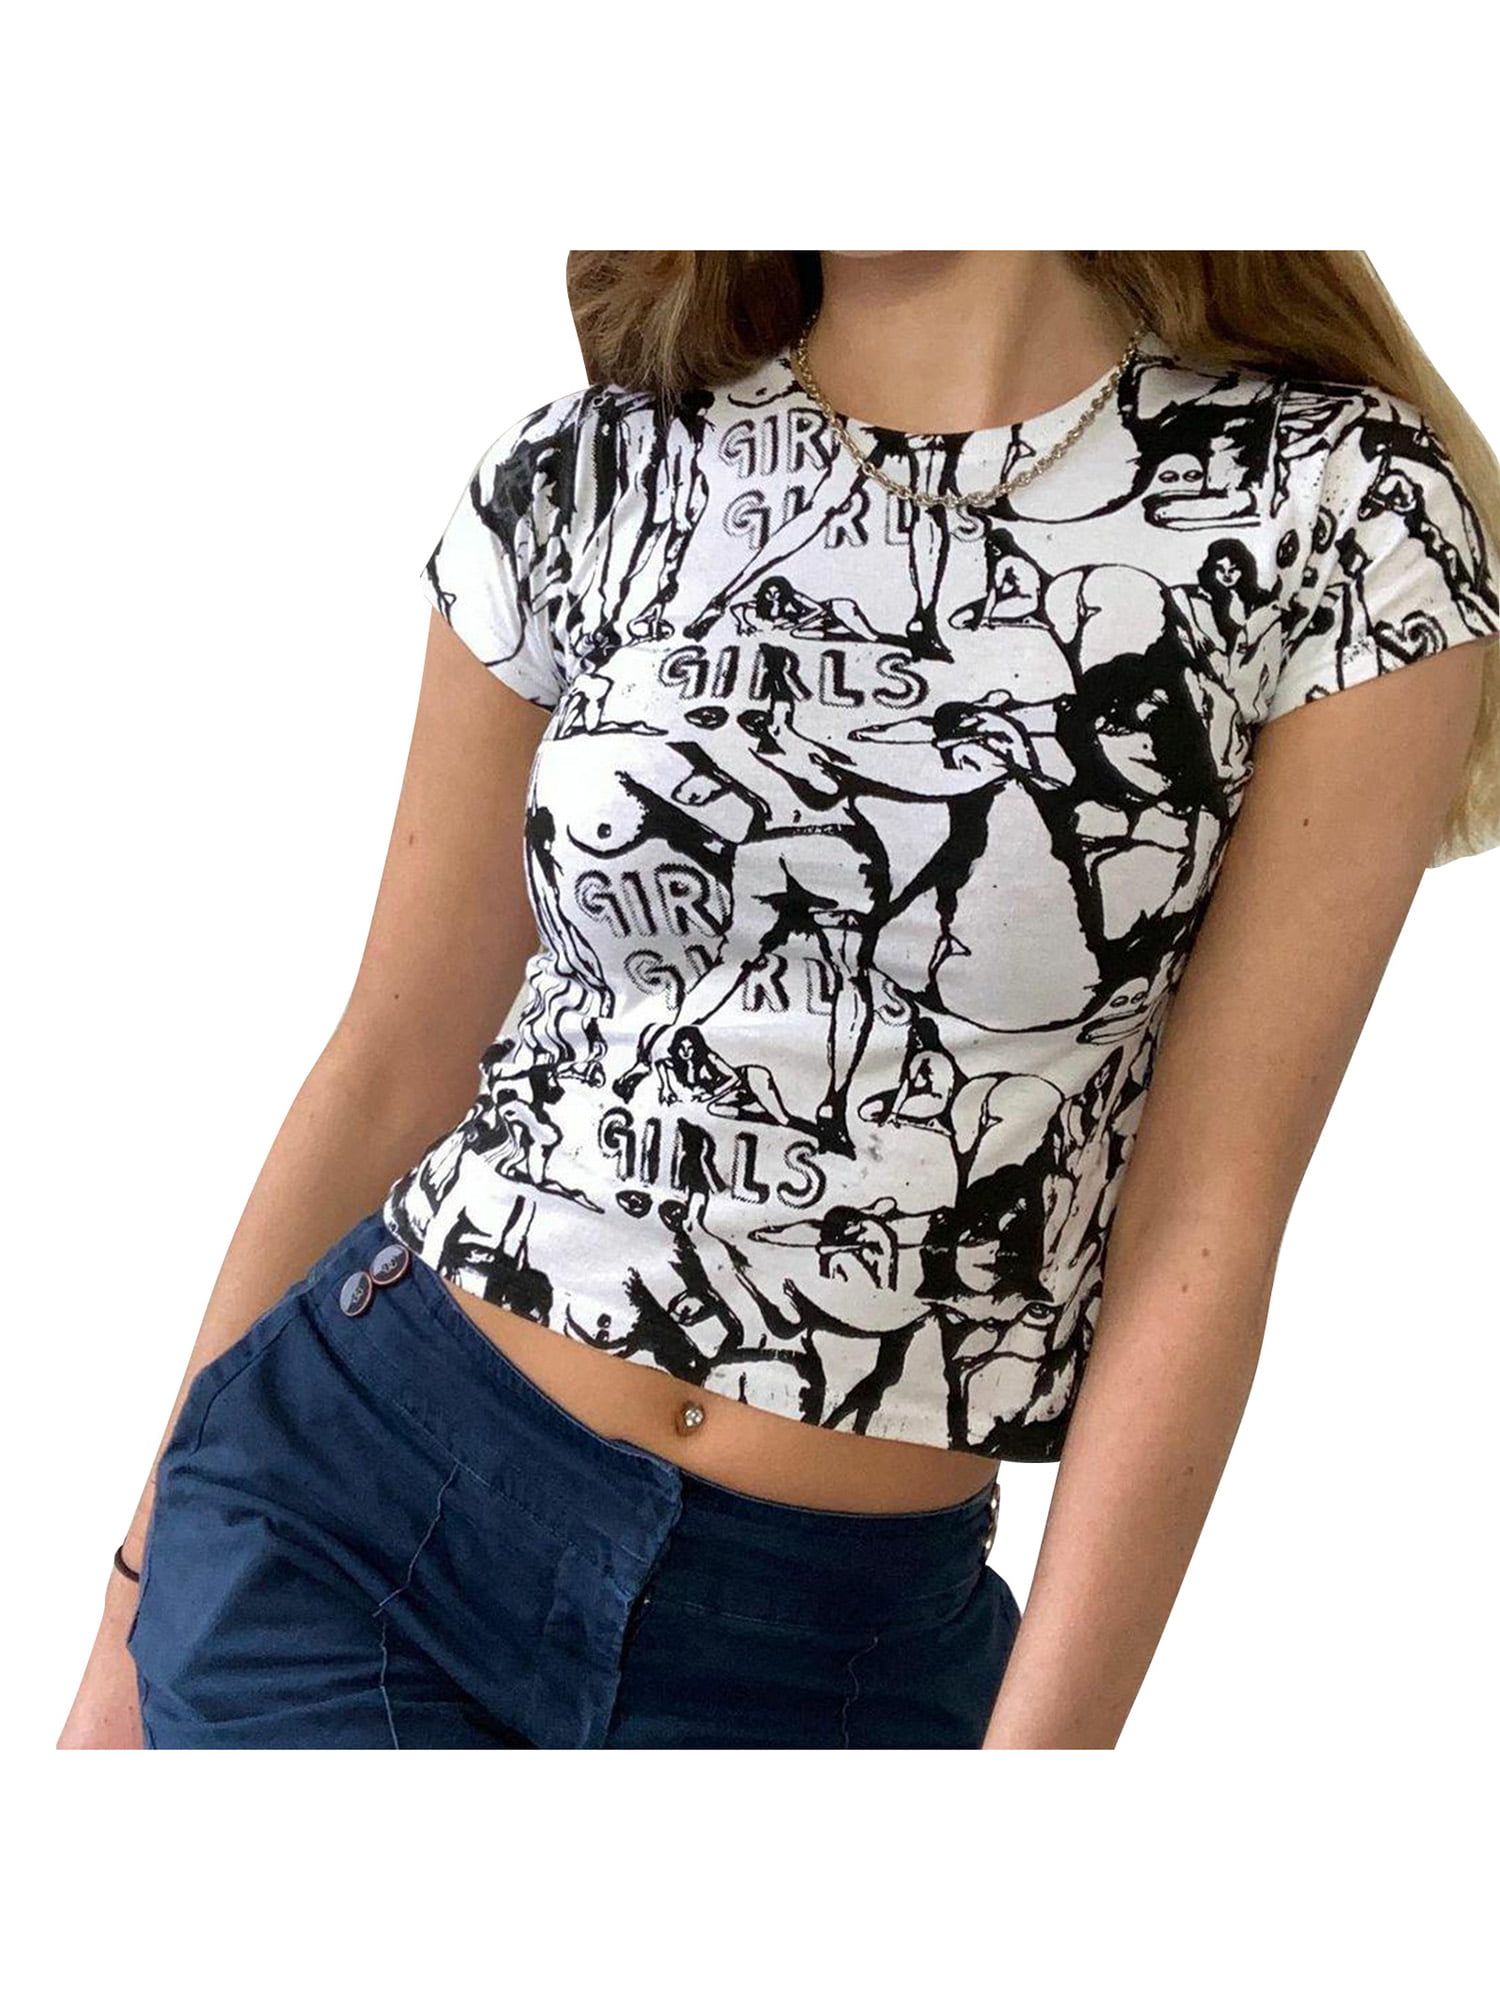 Canrulo Womens Face Portrait Crop Tops Aesthetic T-Shirts 90s Vintage  Graphic Print Short Sleeve E-Girls Harajuku Streetwear White Black S 